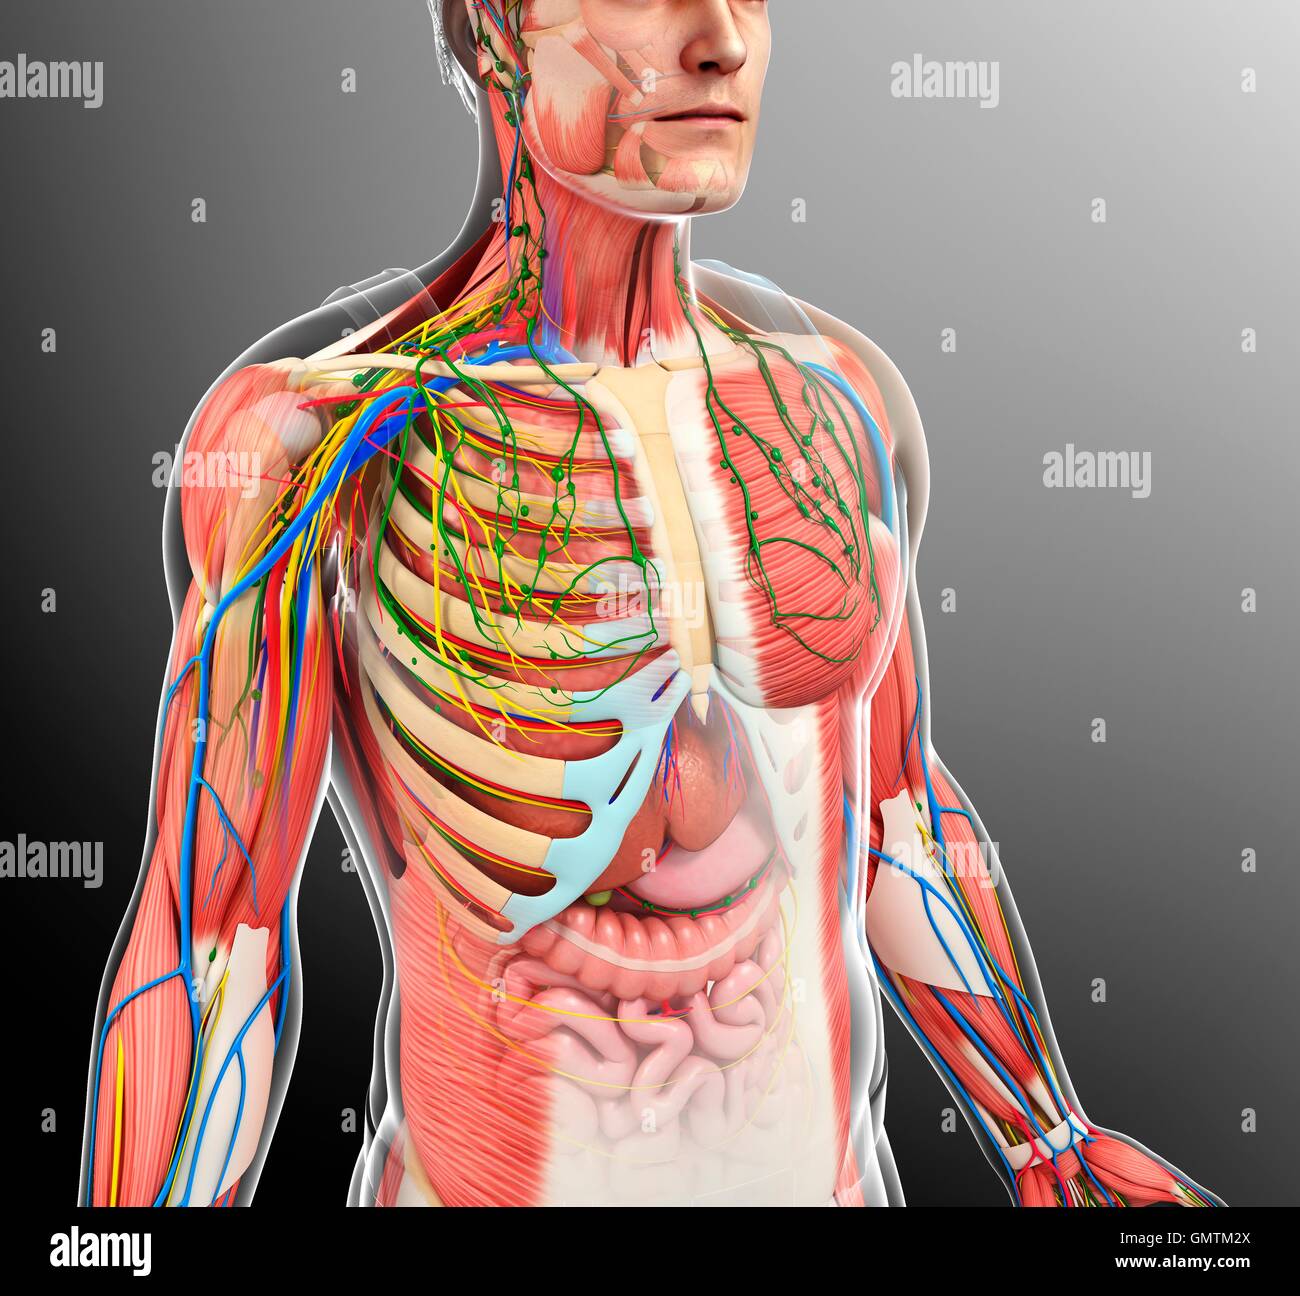 Page 2 Male Torso Anatomy High Resolution Stock Photography And Images Alamy